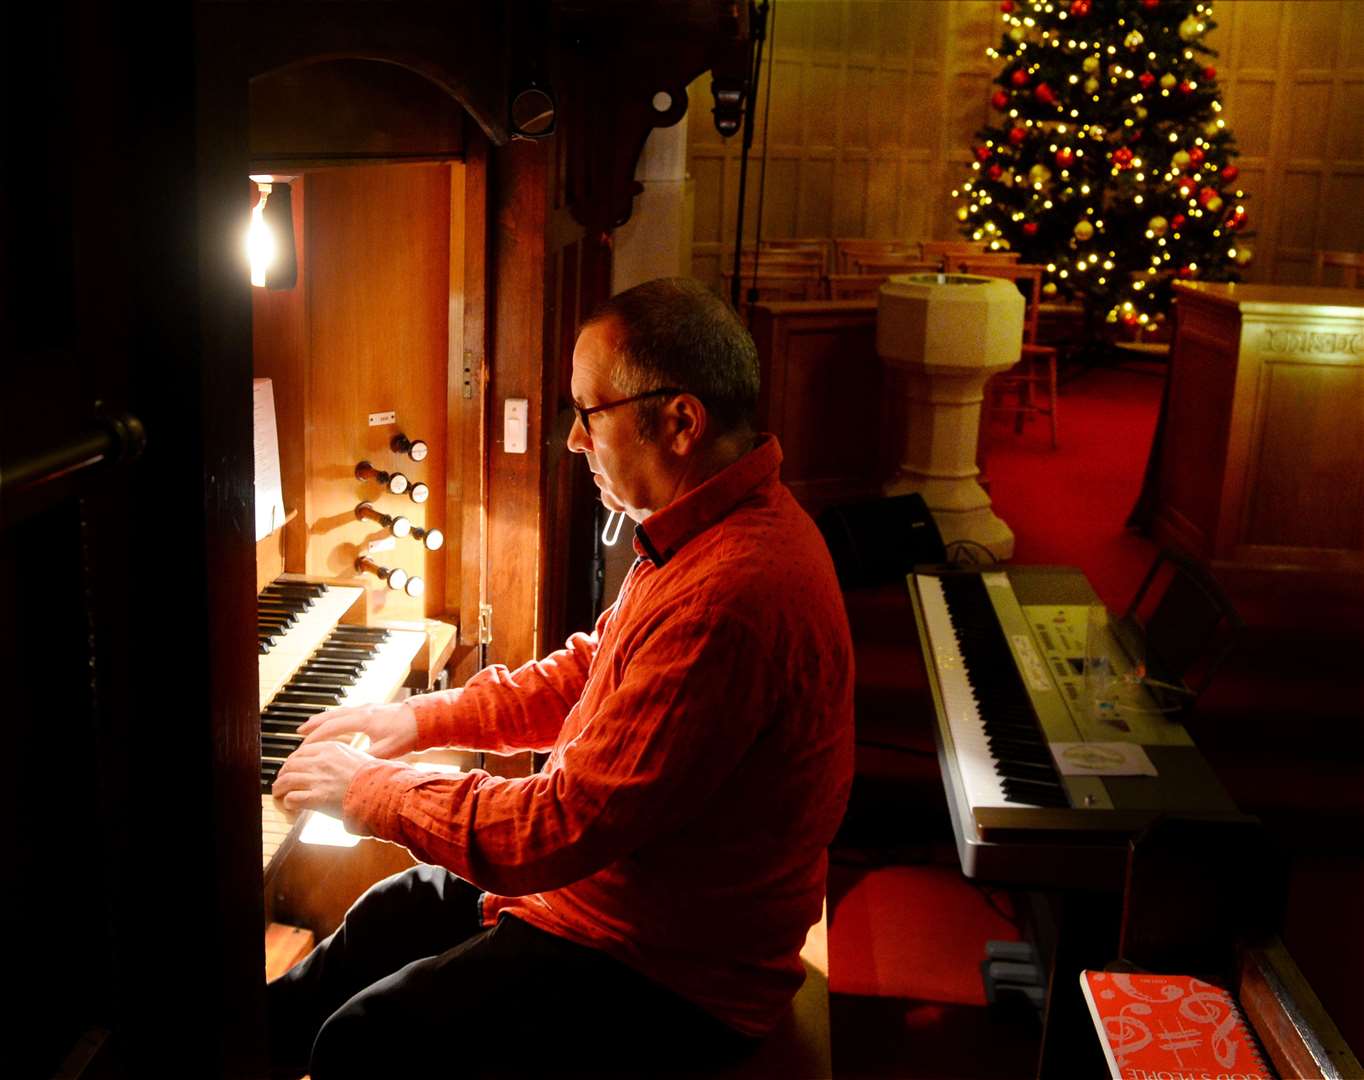 Music was provided by organist Alyn Ross.